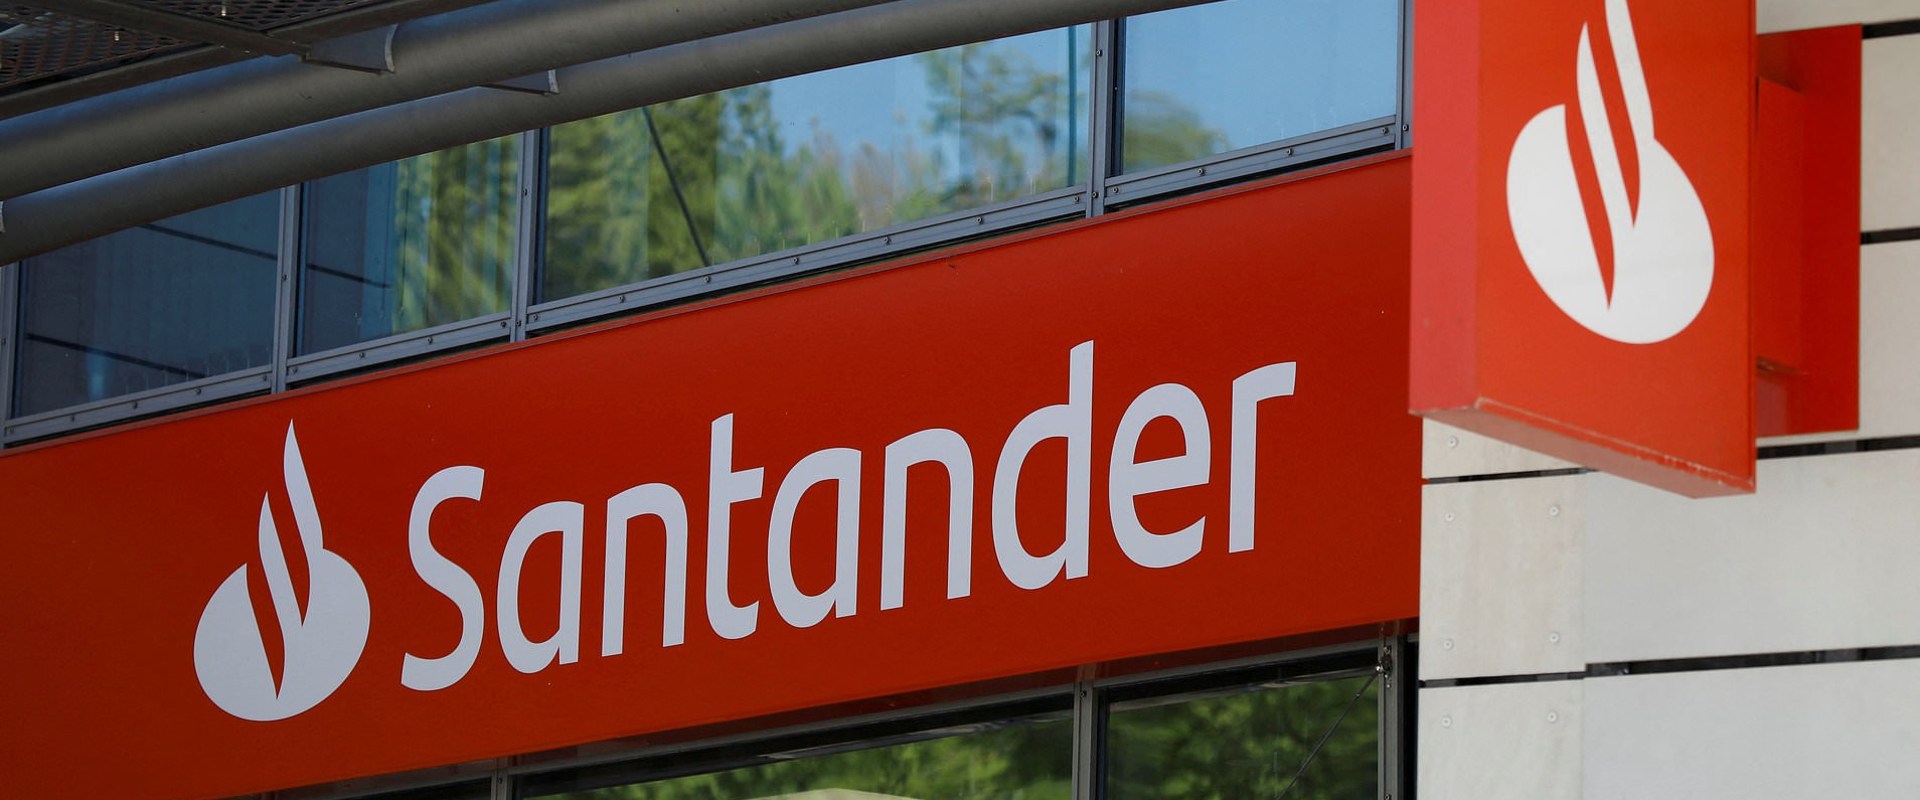 Santander First-Time Buyer Deals and Discounts